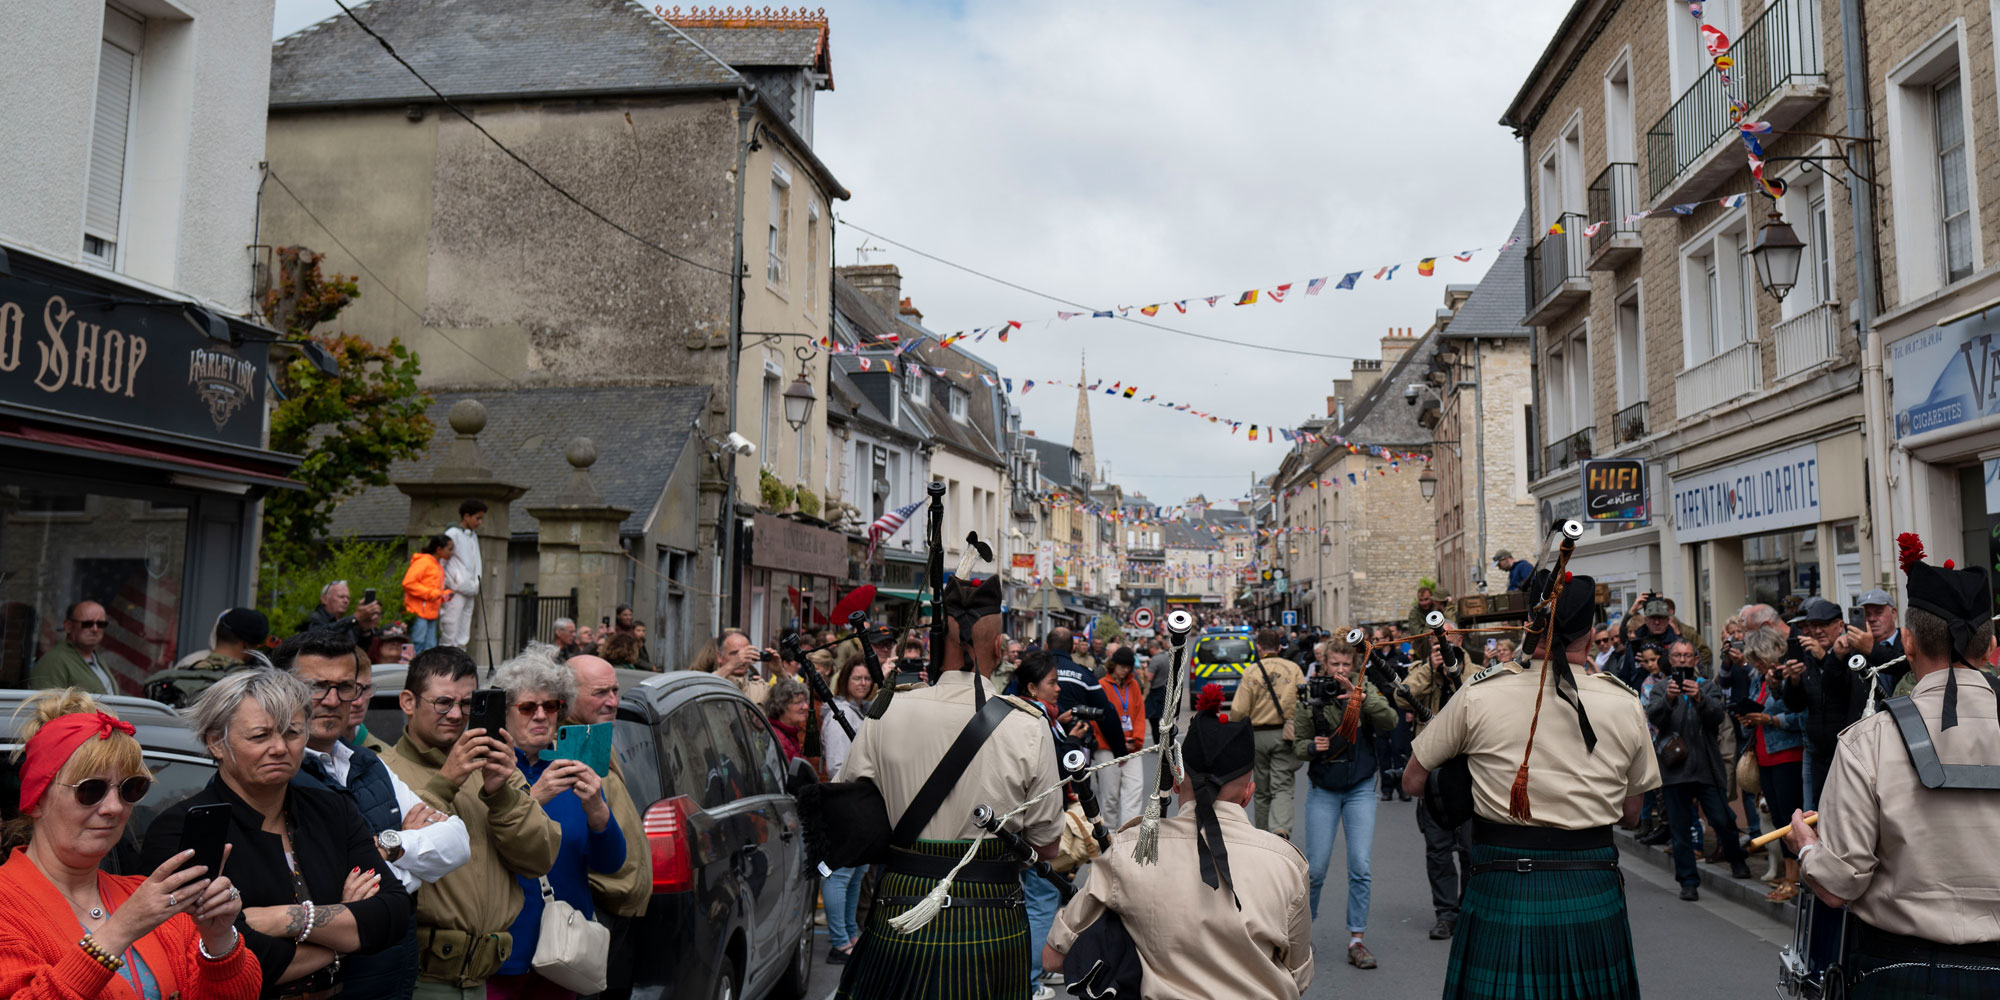 Crowds of people watch a parade featuring bagpipers in a French town with flags flying